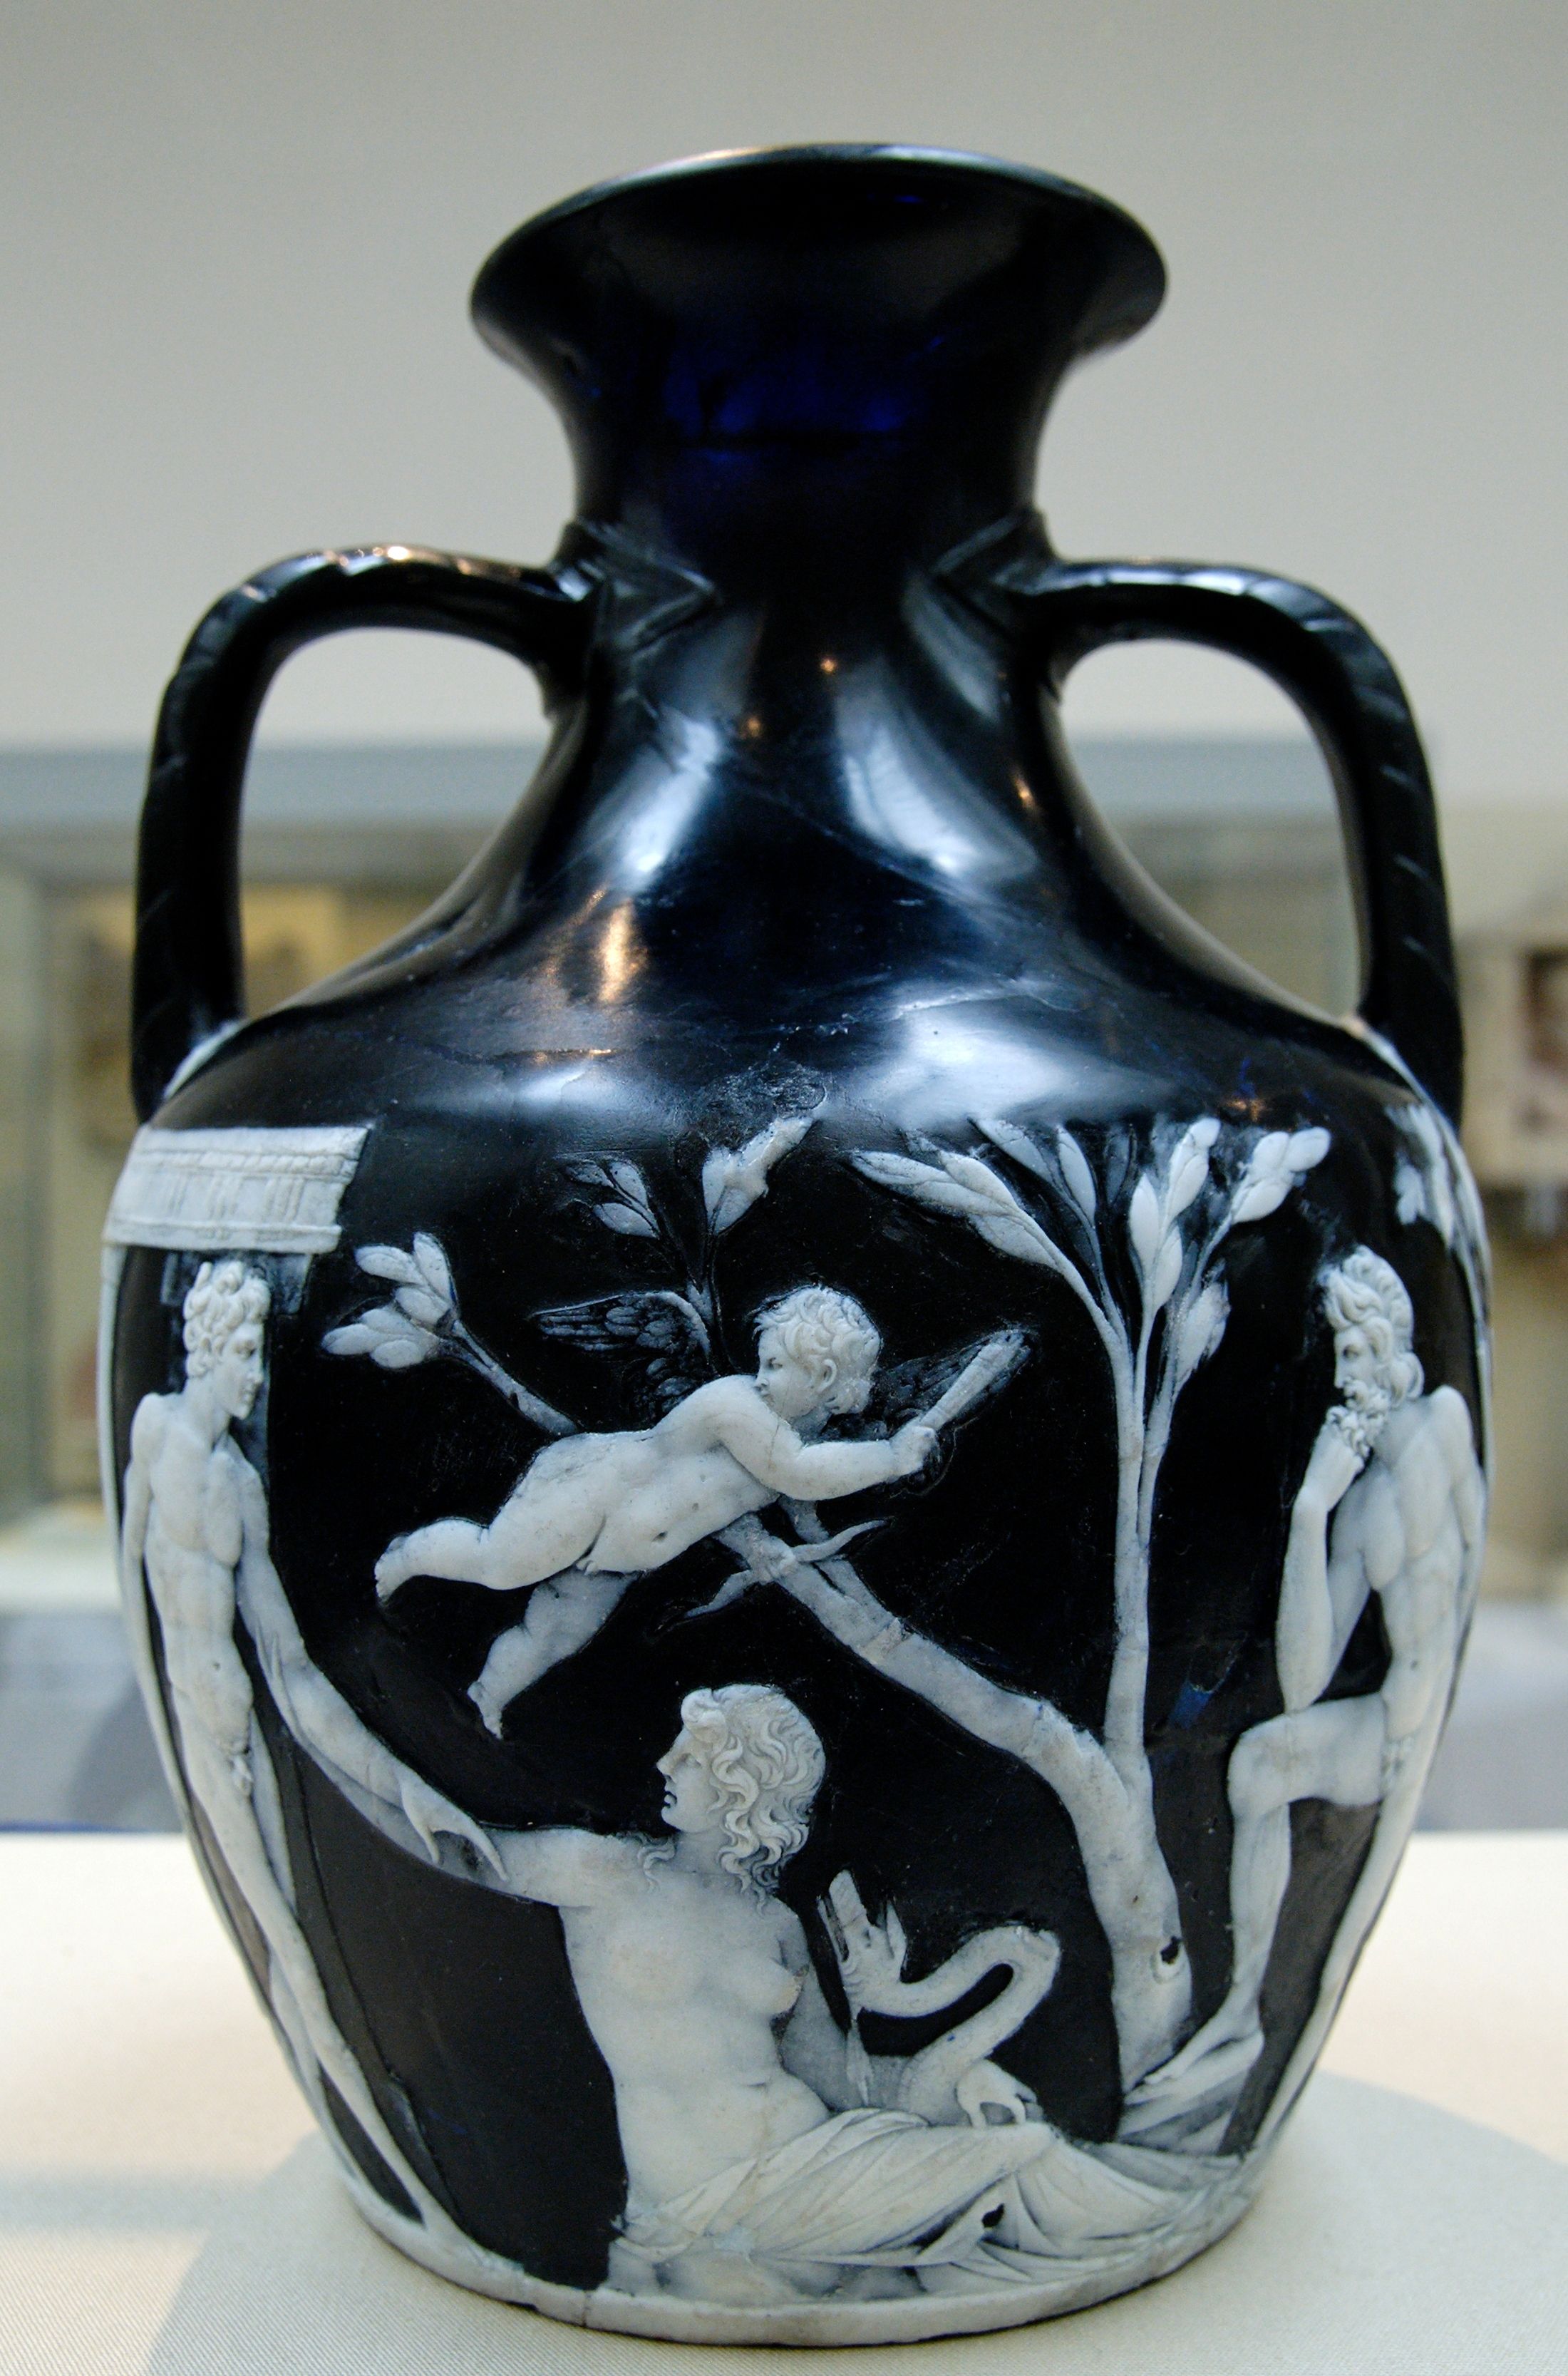 In 1845, the vase was (purposefully) shattered by drunk man. It was restored in 1845, 1948 and again in 1989. The Portland Vase made of Roman cameo glass, British Museum. 